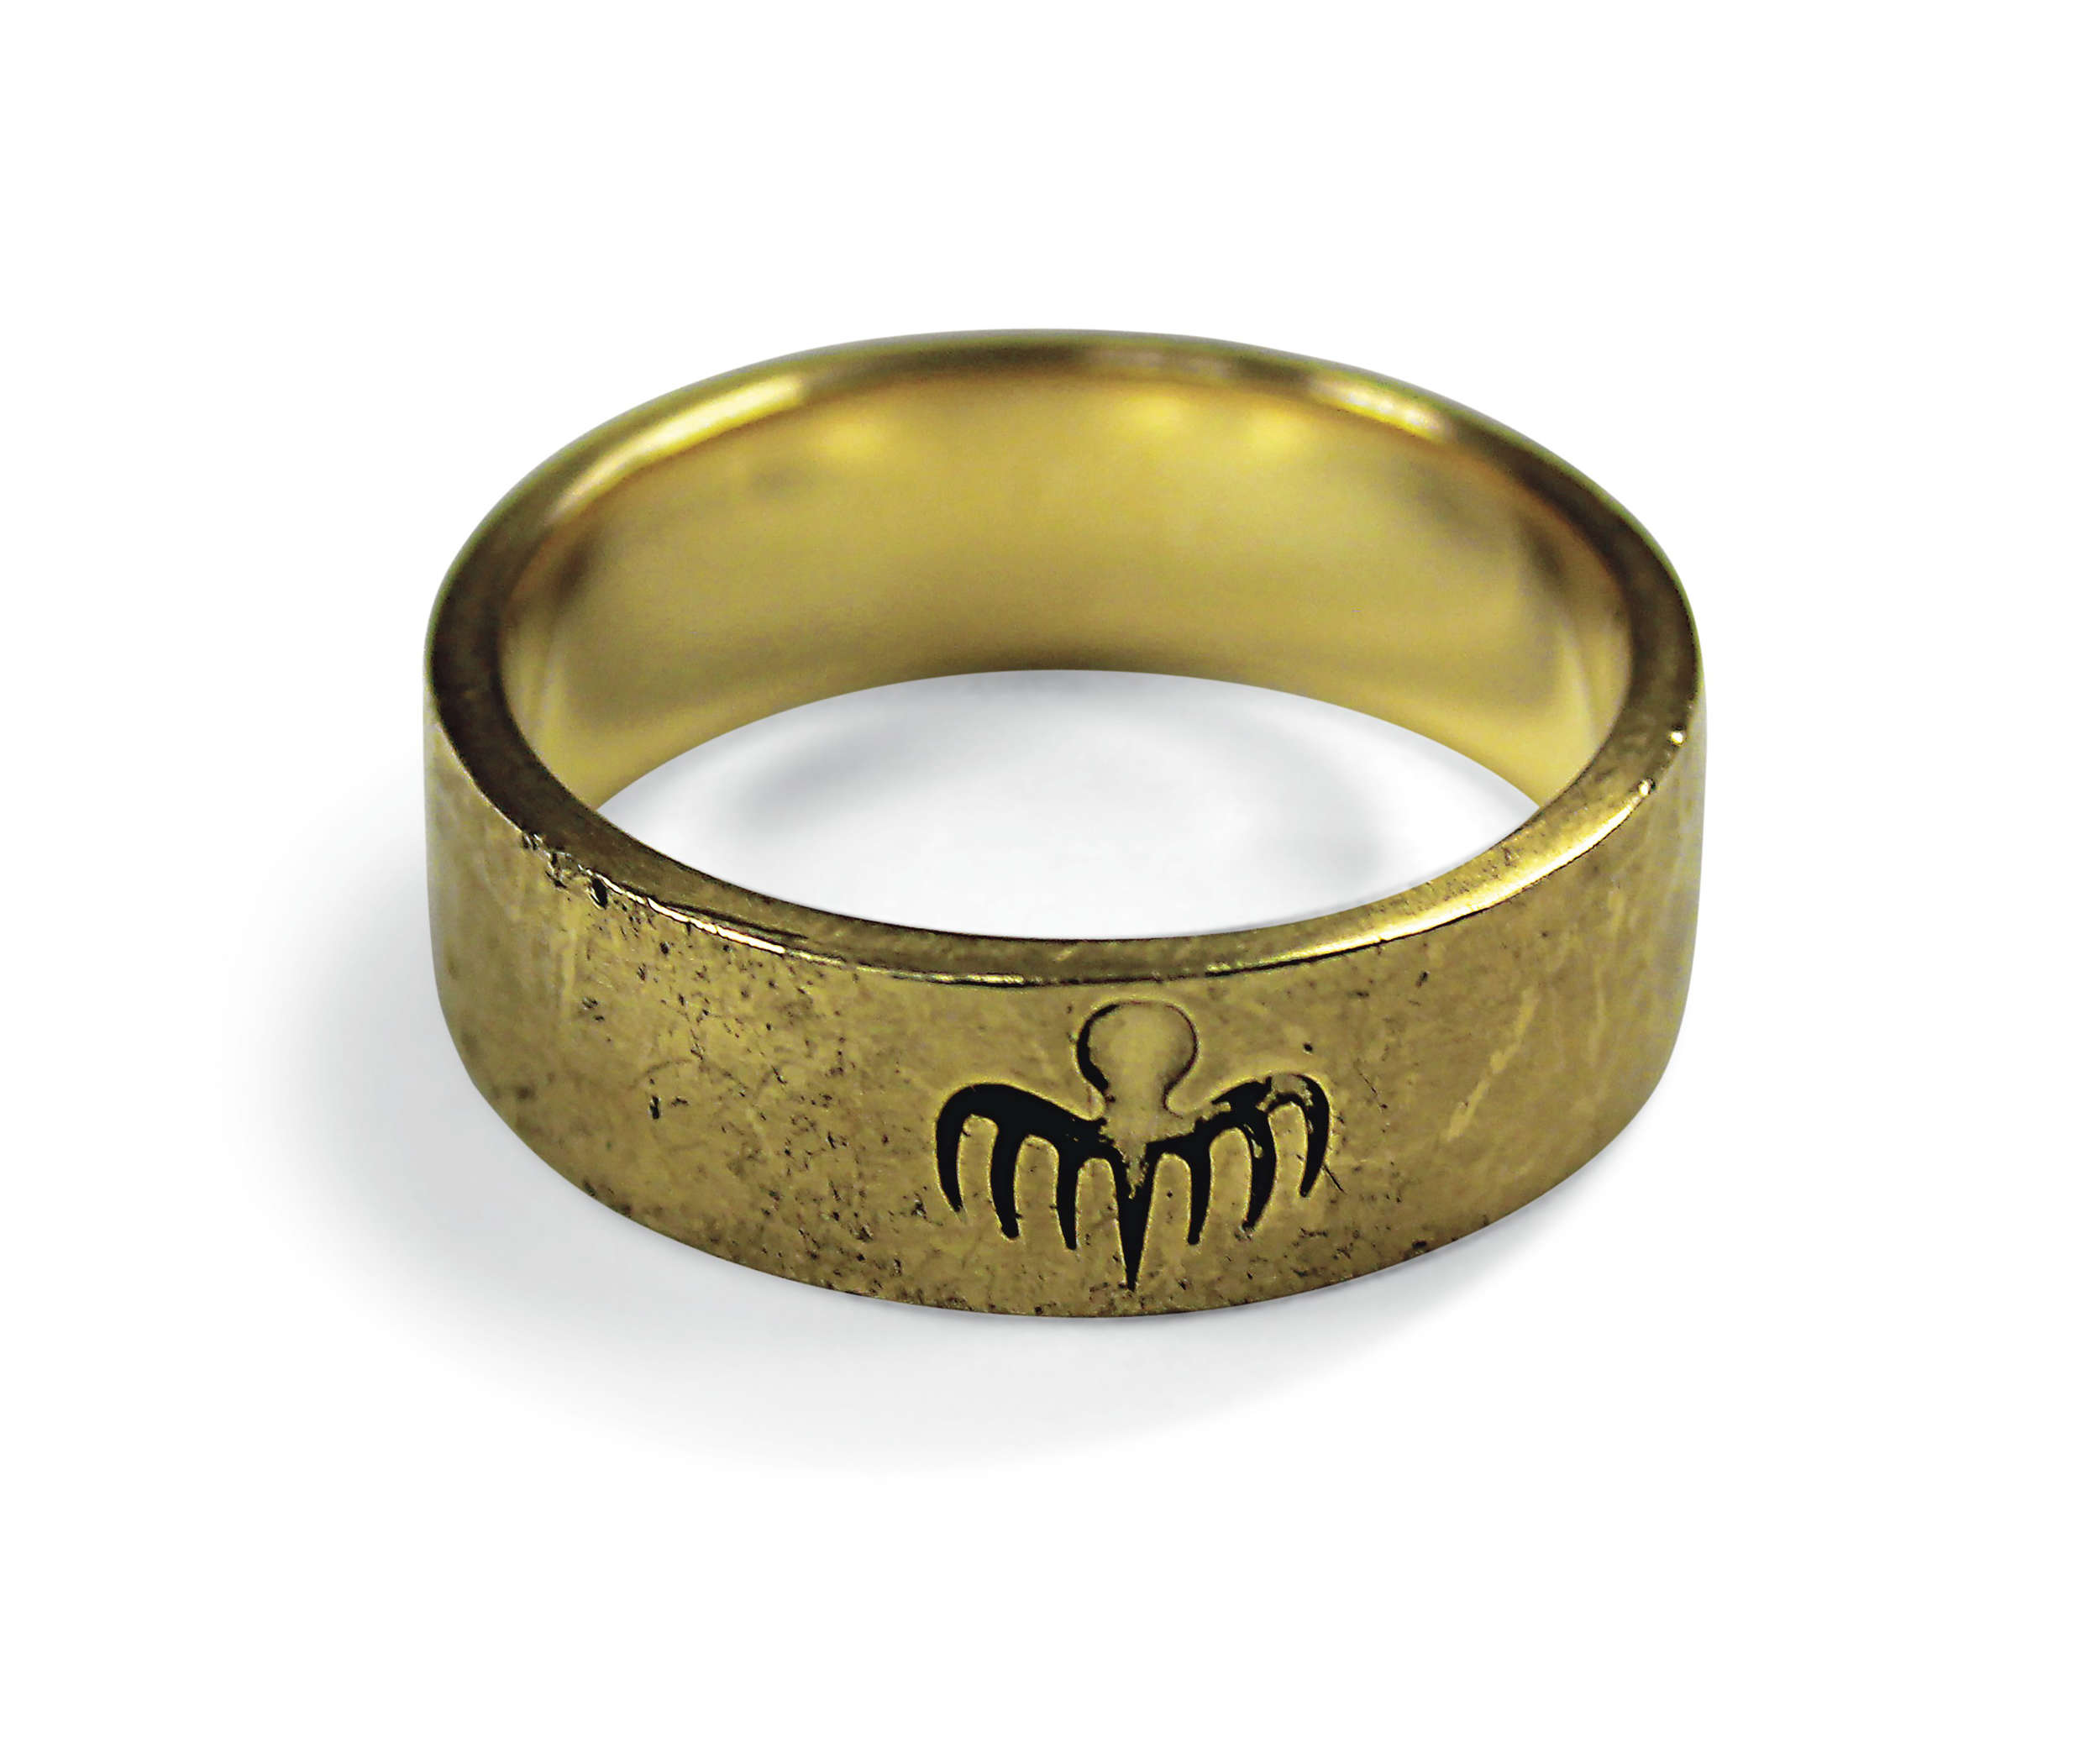 Live-bidding-in-London-will-start-at-5700-on-this-gold-ring-a-critical-piece-in-the-Spectre-plot-that-was-worn-by-the-villain-Oberhauser-played-by-actor-Christoph-Waltz-The-ring-is-9-carat-yellow-gold-with-a-7-tentacle-octopus-logo-imprinted-in-it-.jpg